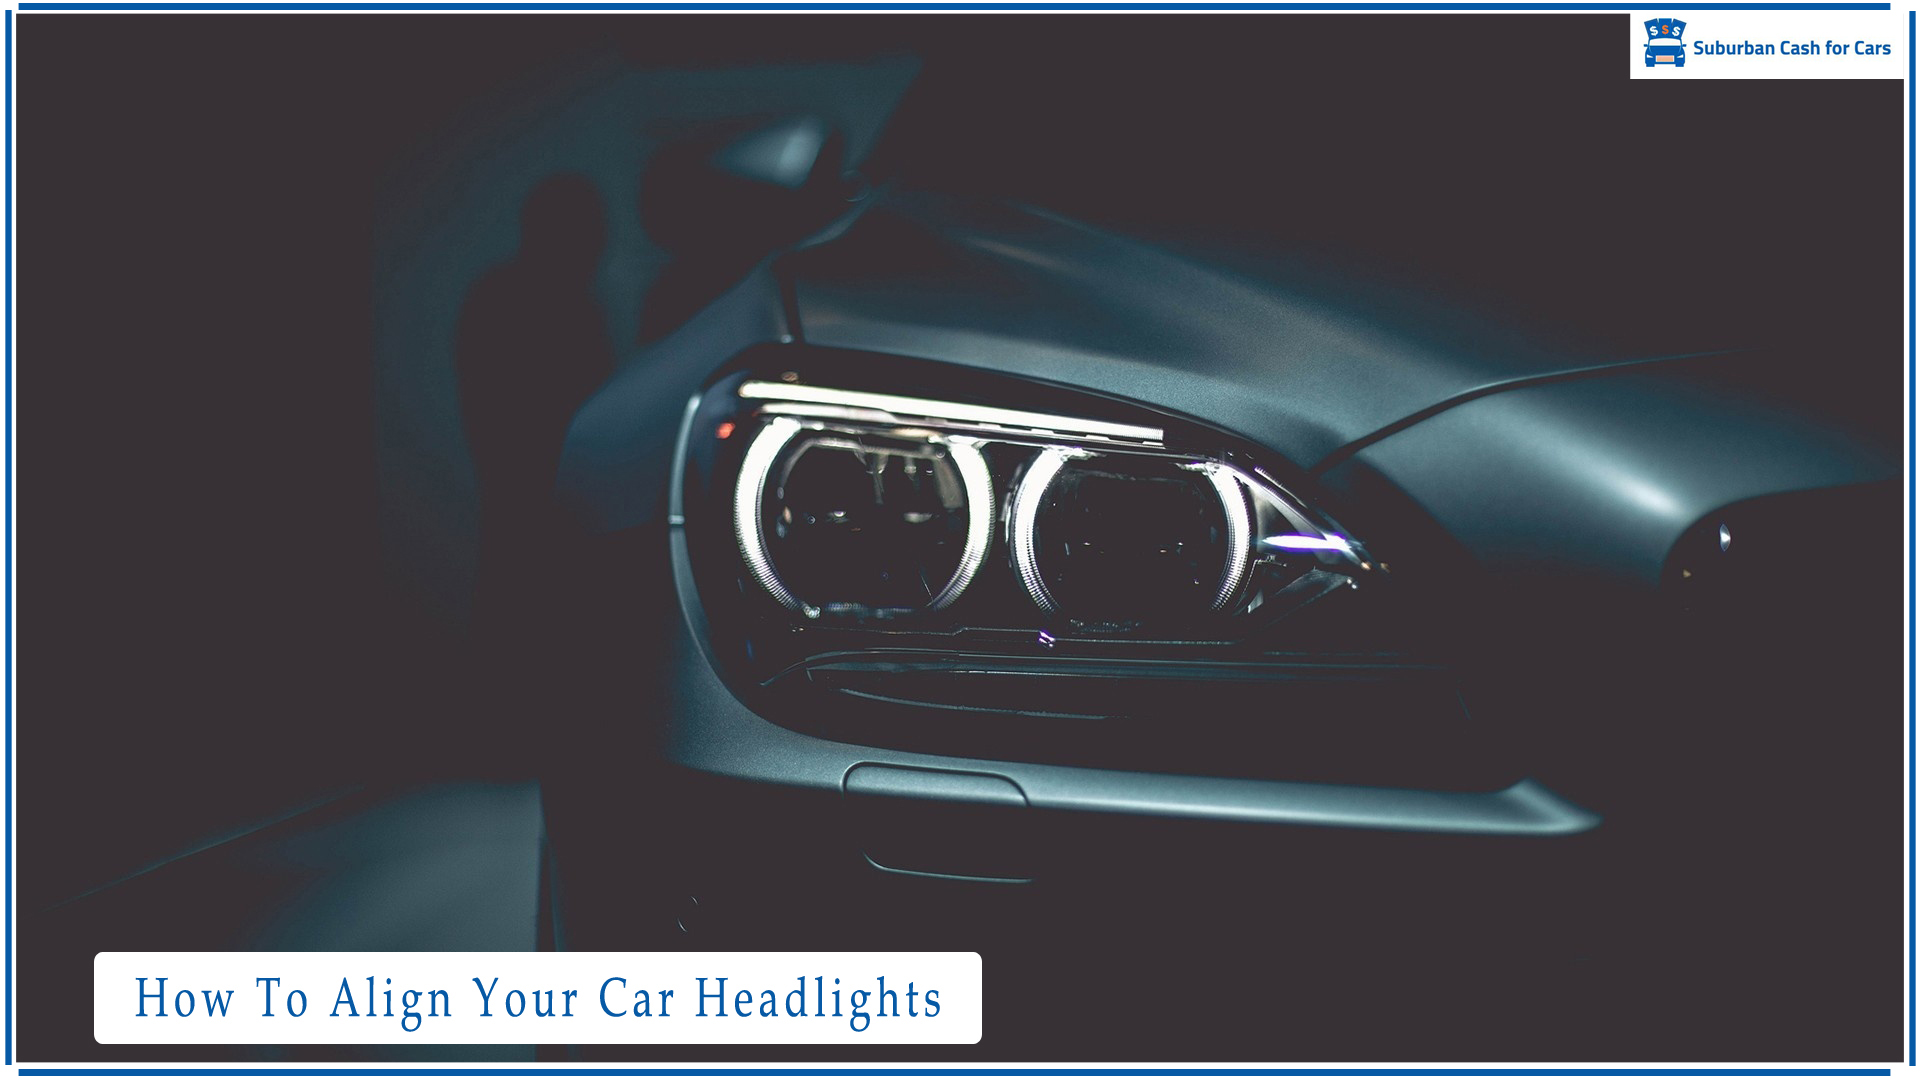 How To Align Your Car Headlights?